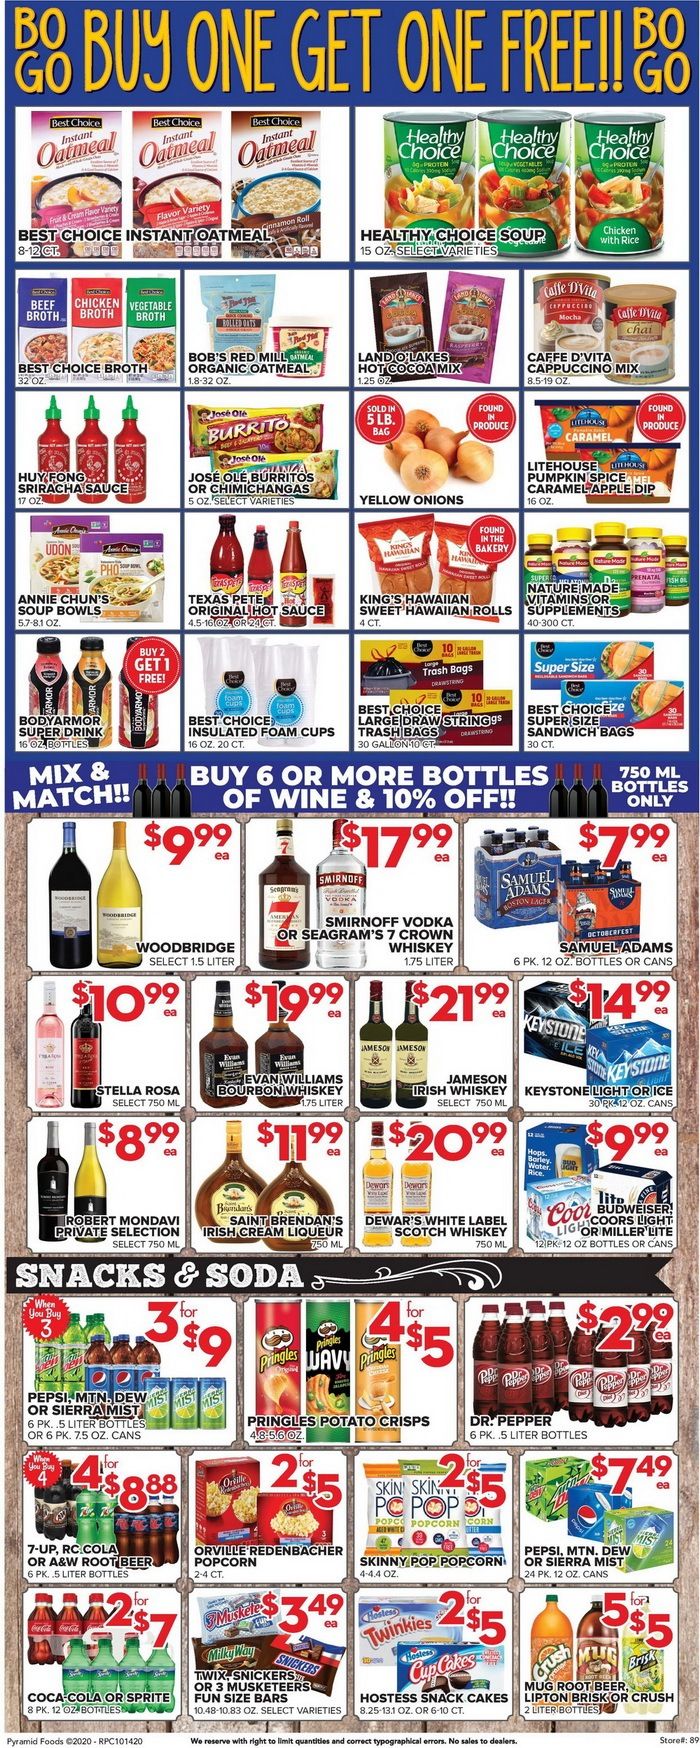 Price Cutter Weekly Ad Oct 14 – Oct 20, 2020